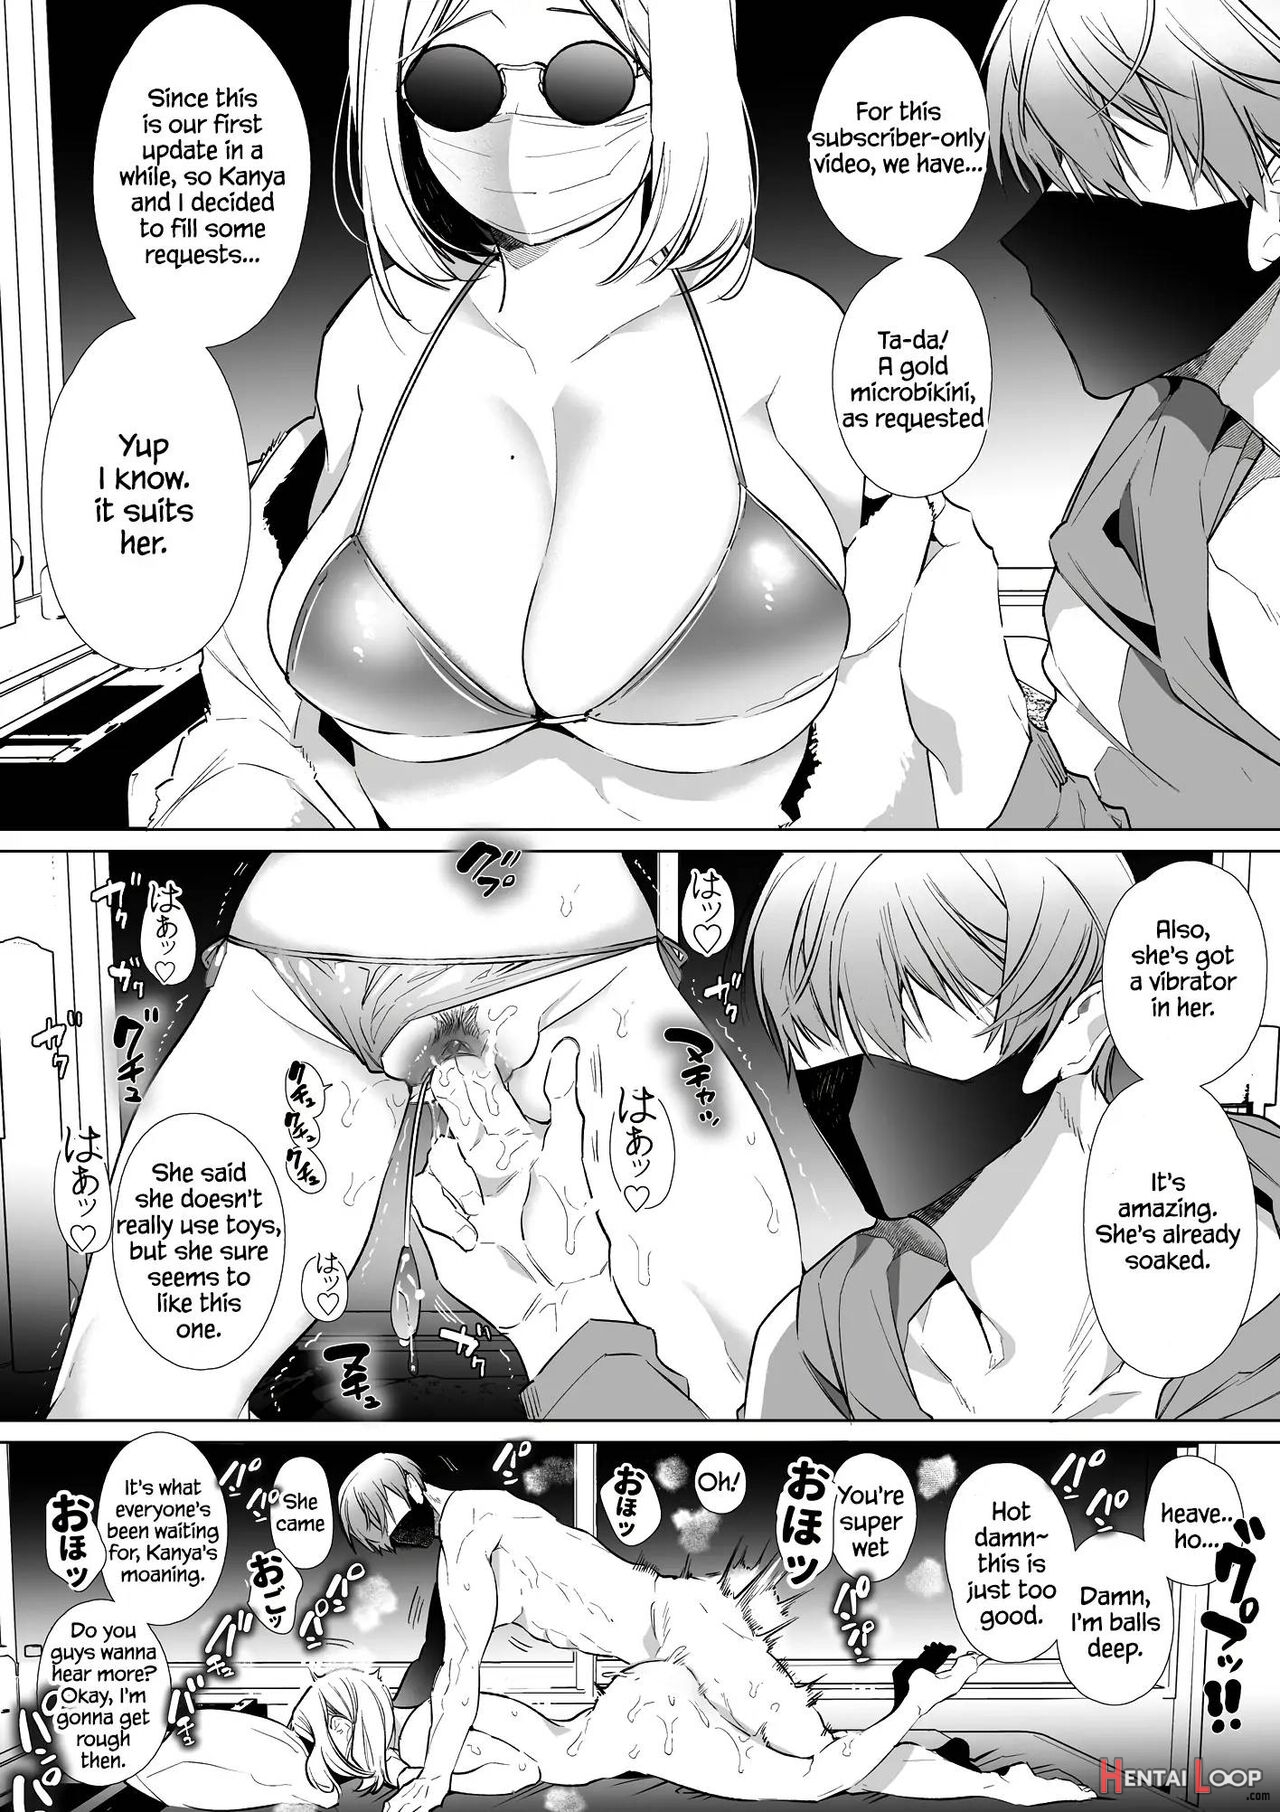 Kana-san Ntr ~ Degradation Of A Housewife By A Guy In An Alter Account ~ page 50